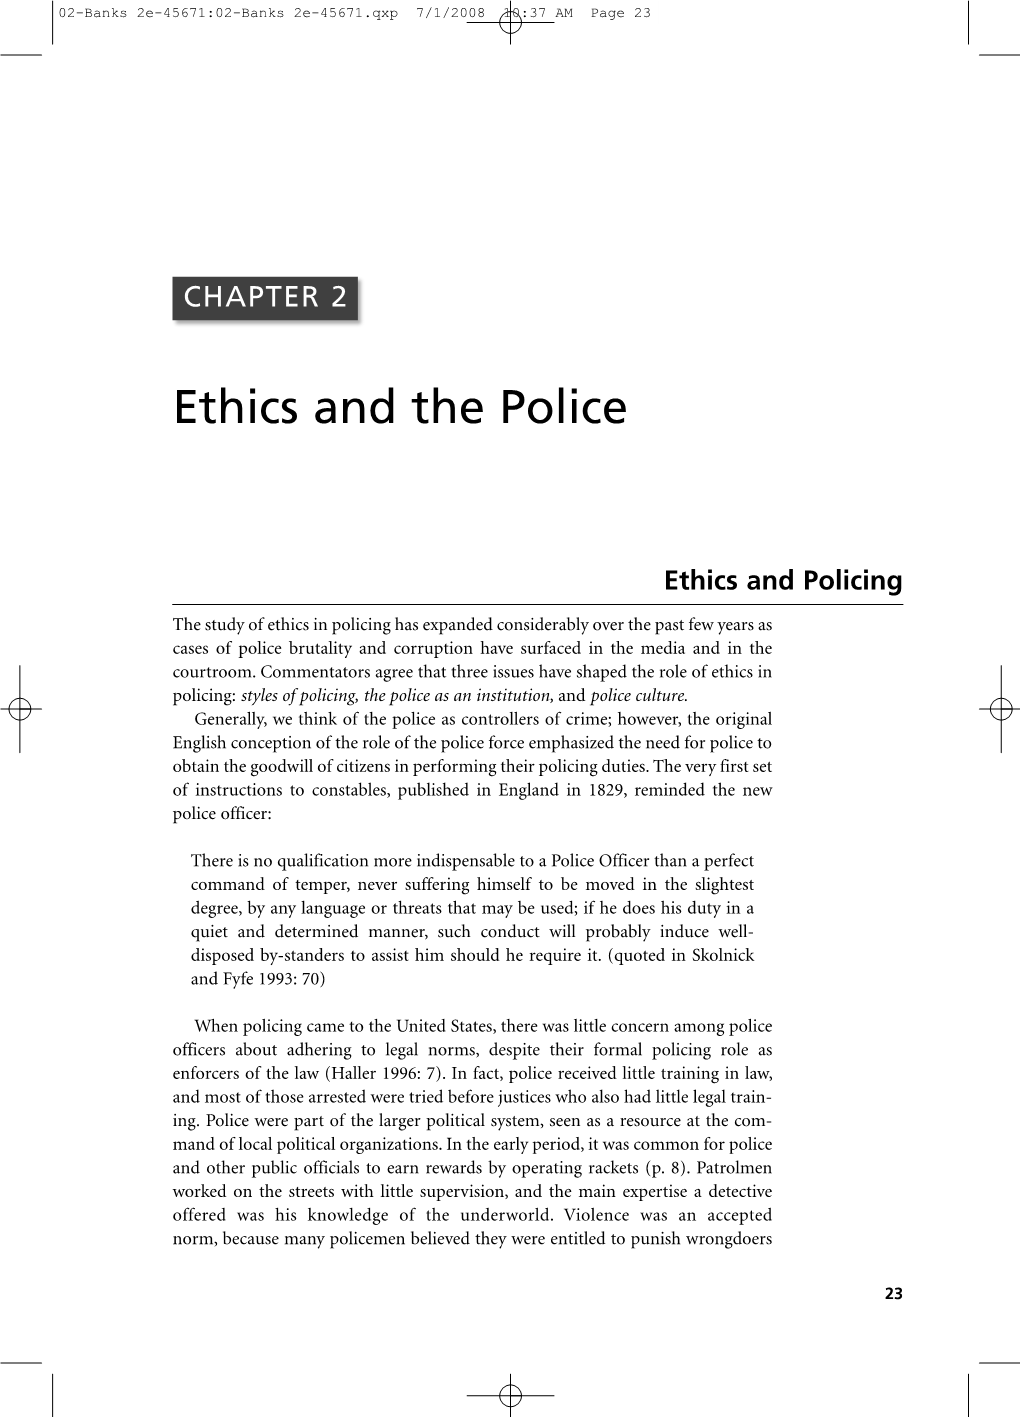 Ethics and the Police